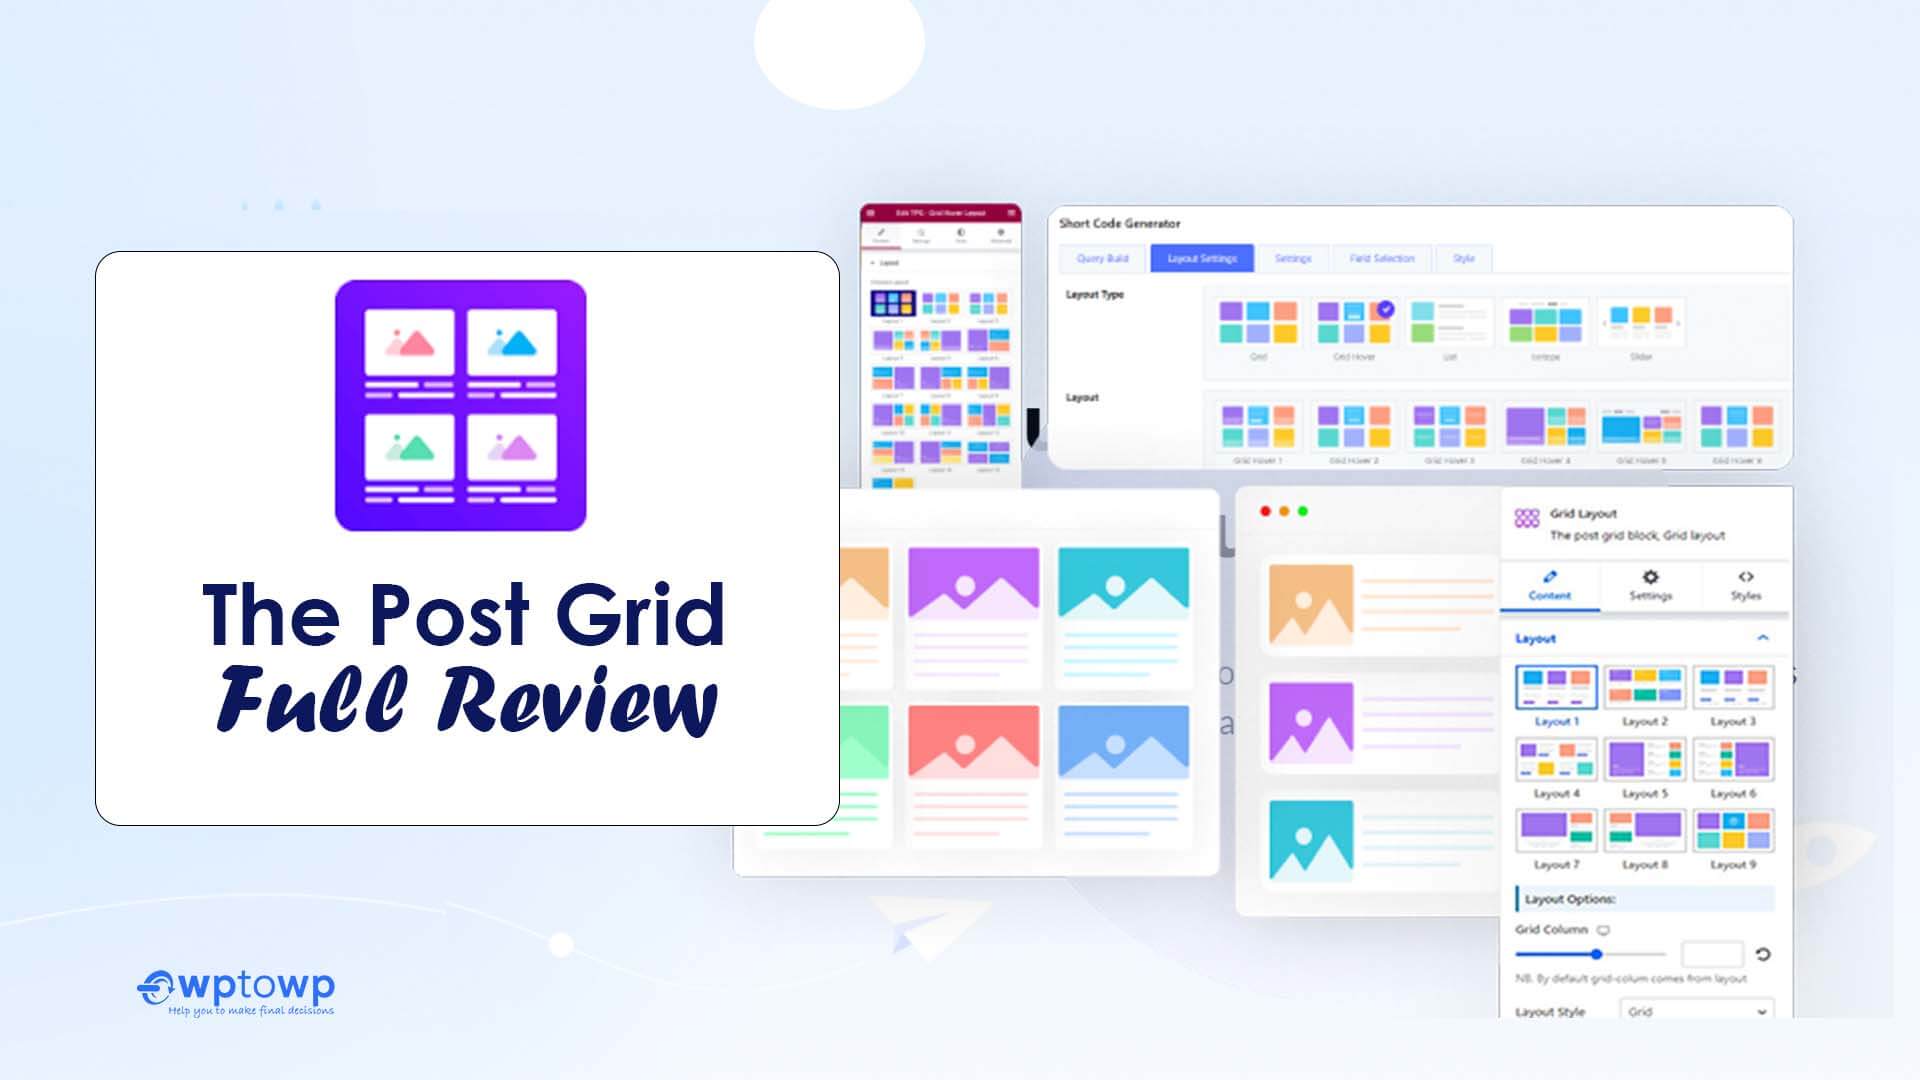 The Post Grid Review, Wptowp